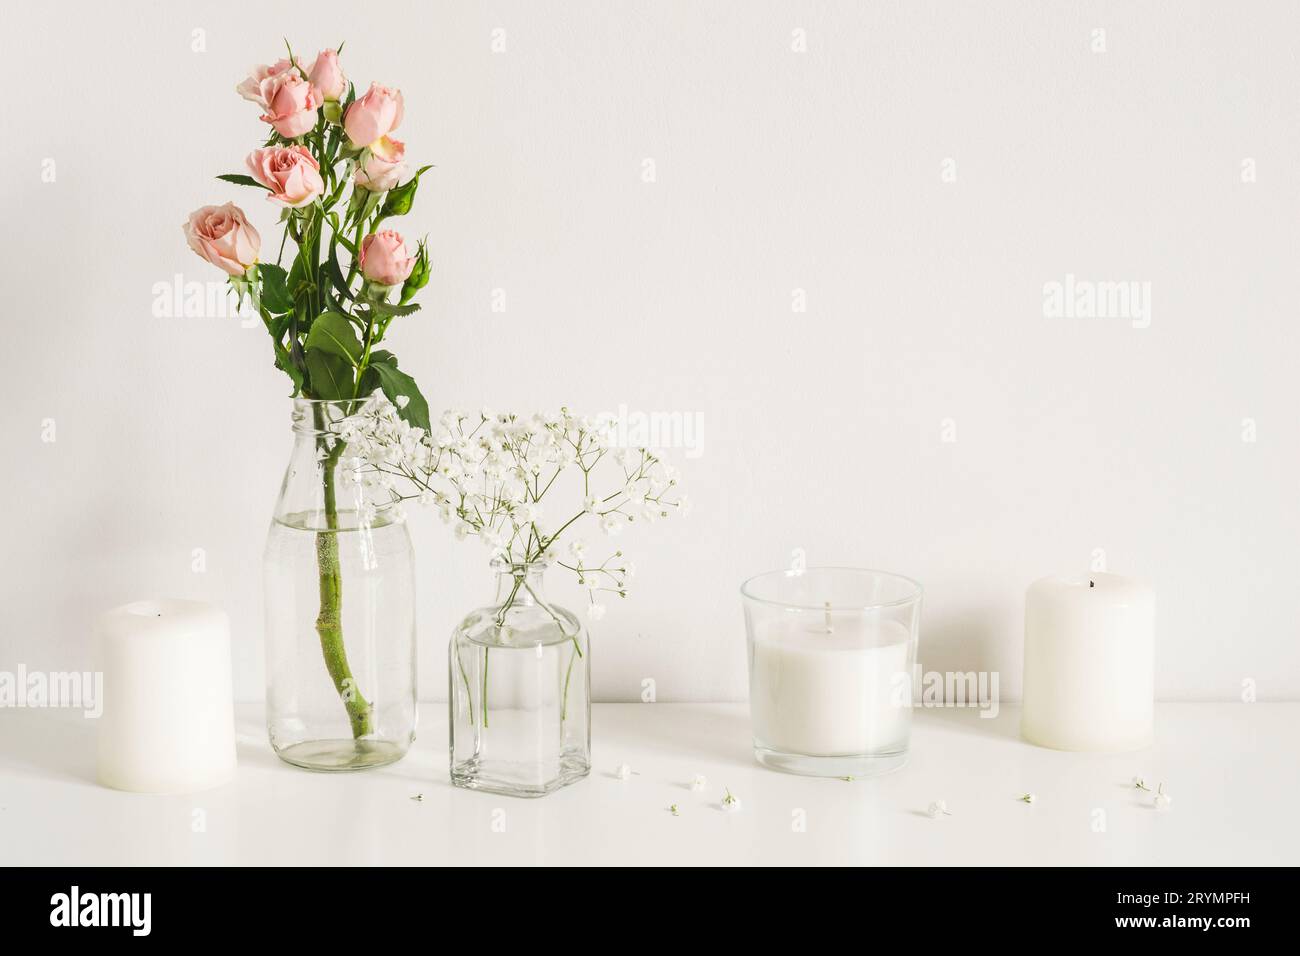 White arrangement of roses, baby's breath flowers and candles. Copy space for lettering Stock Photo